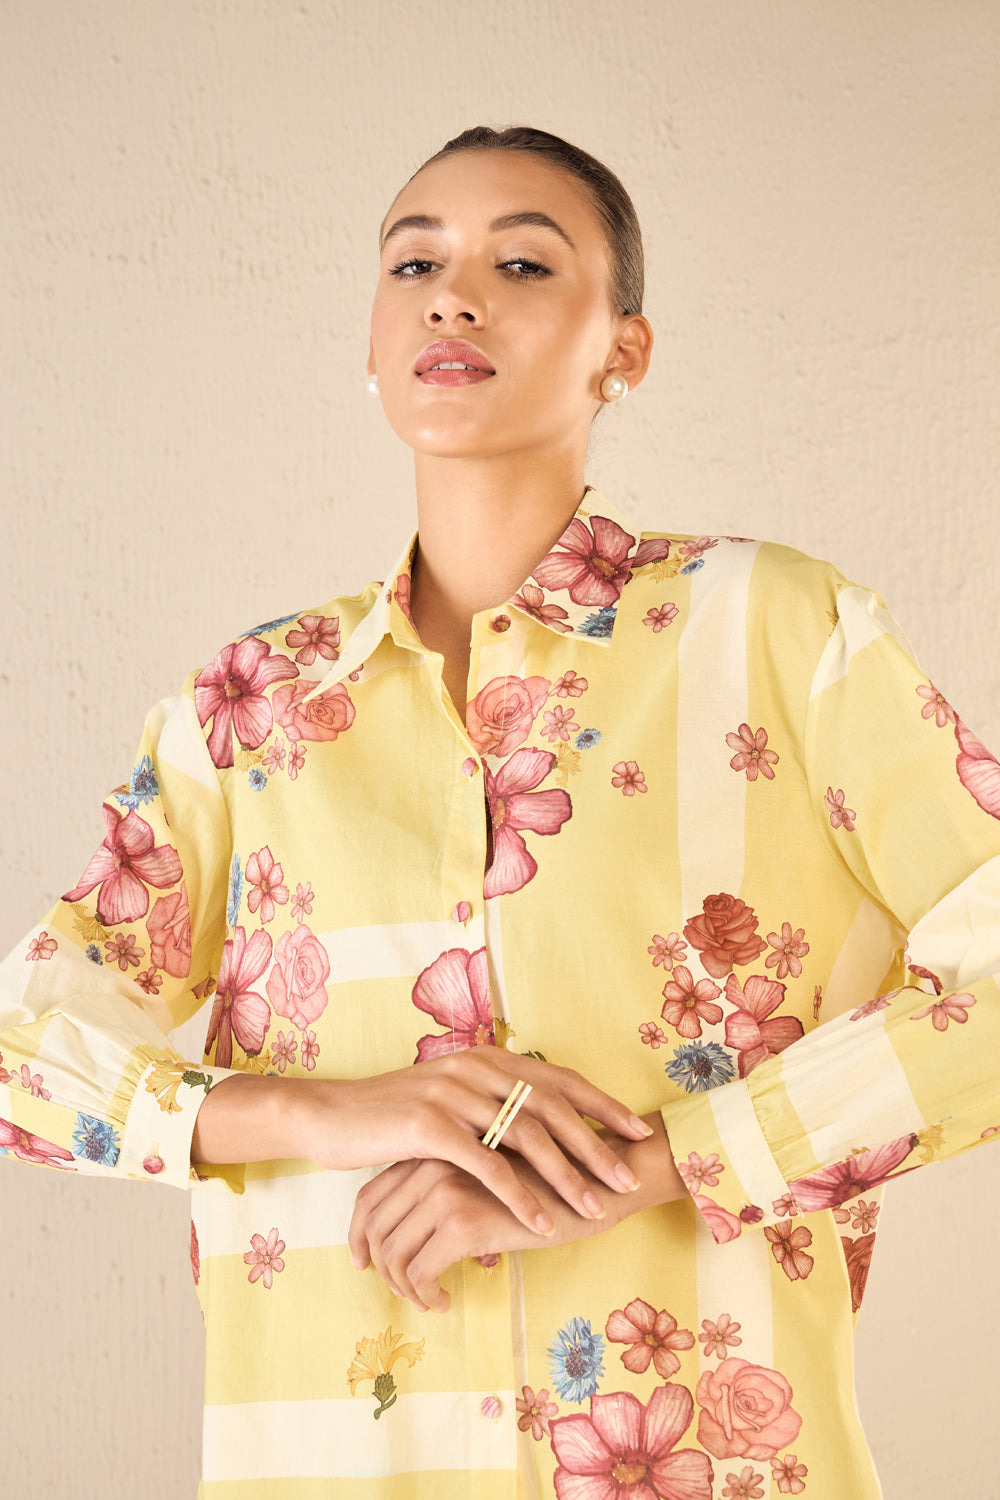 Floral Fusion: Yellow & White Stripe Floral Shirt with Ivory Flair Pants